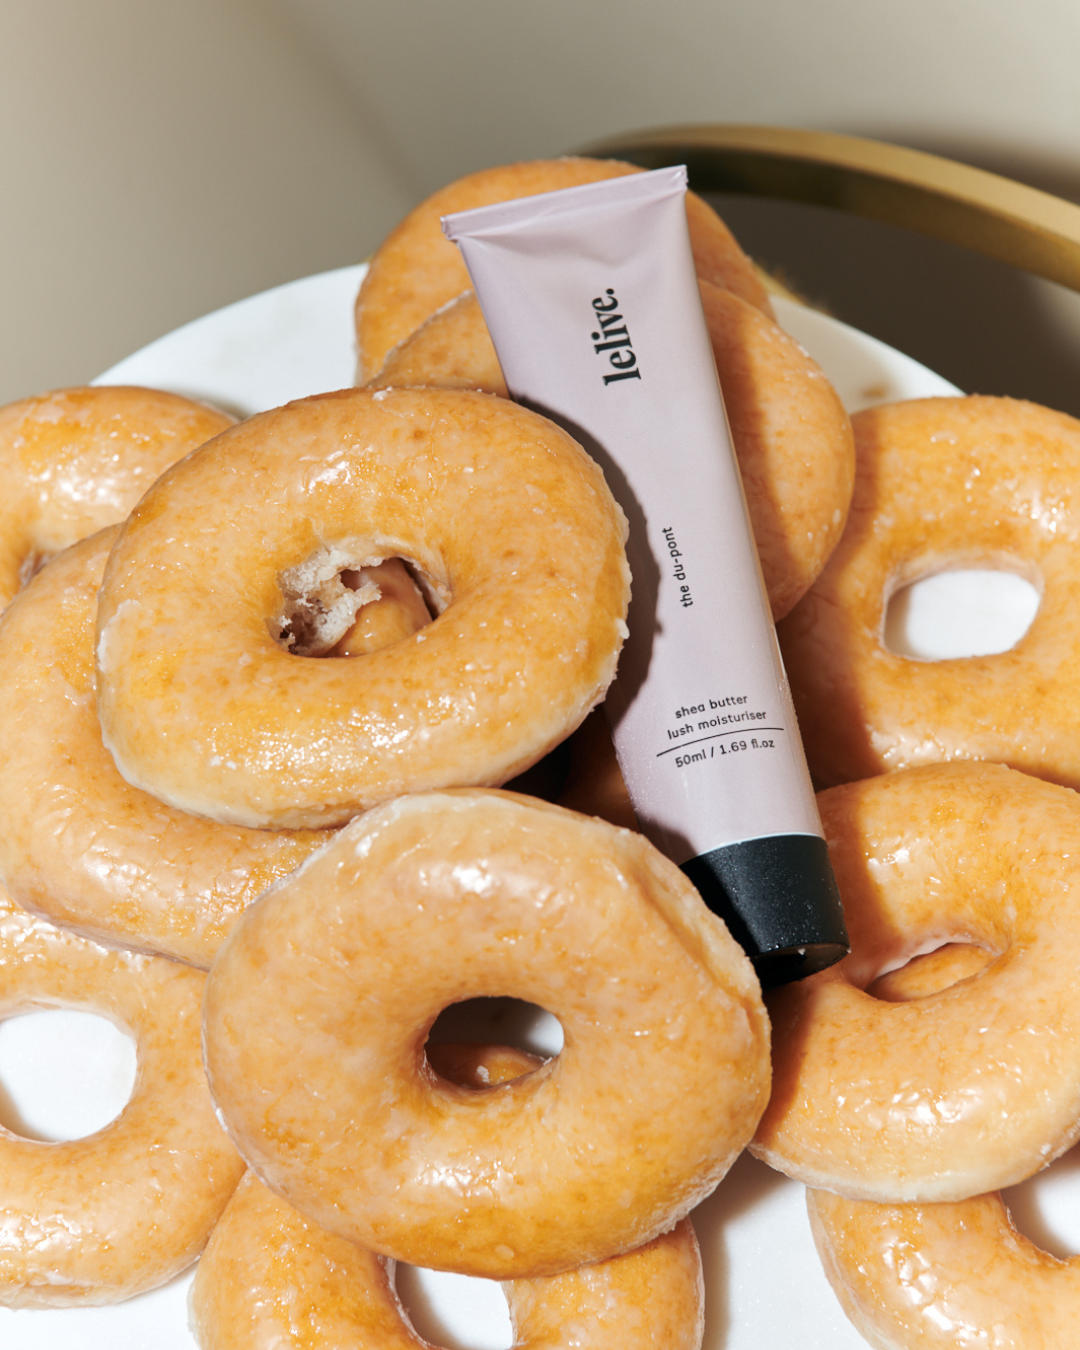 tube of moisturiser on a pile of glazed donuts, glazed donuts, glazed donut skin, donut skin, beauty, beauty trend, the suite, the suite edit, brutal fruit